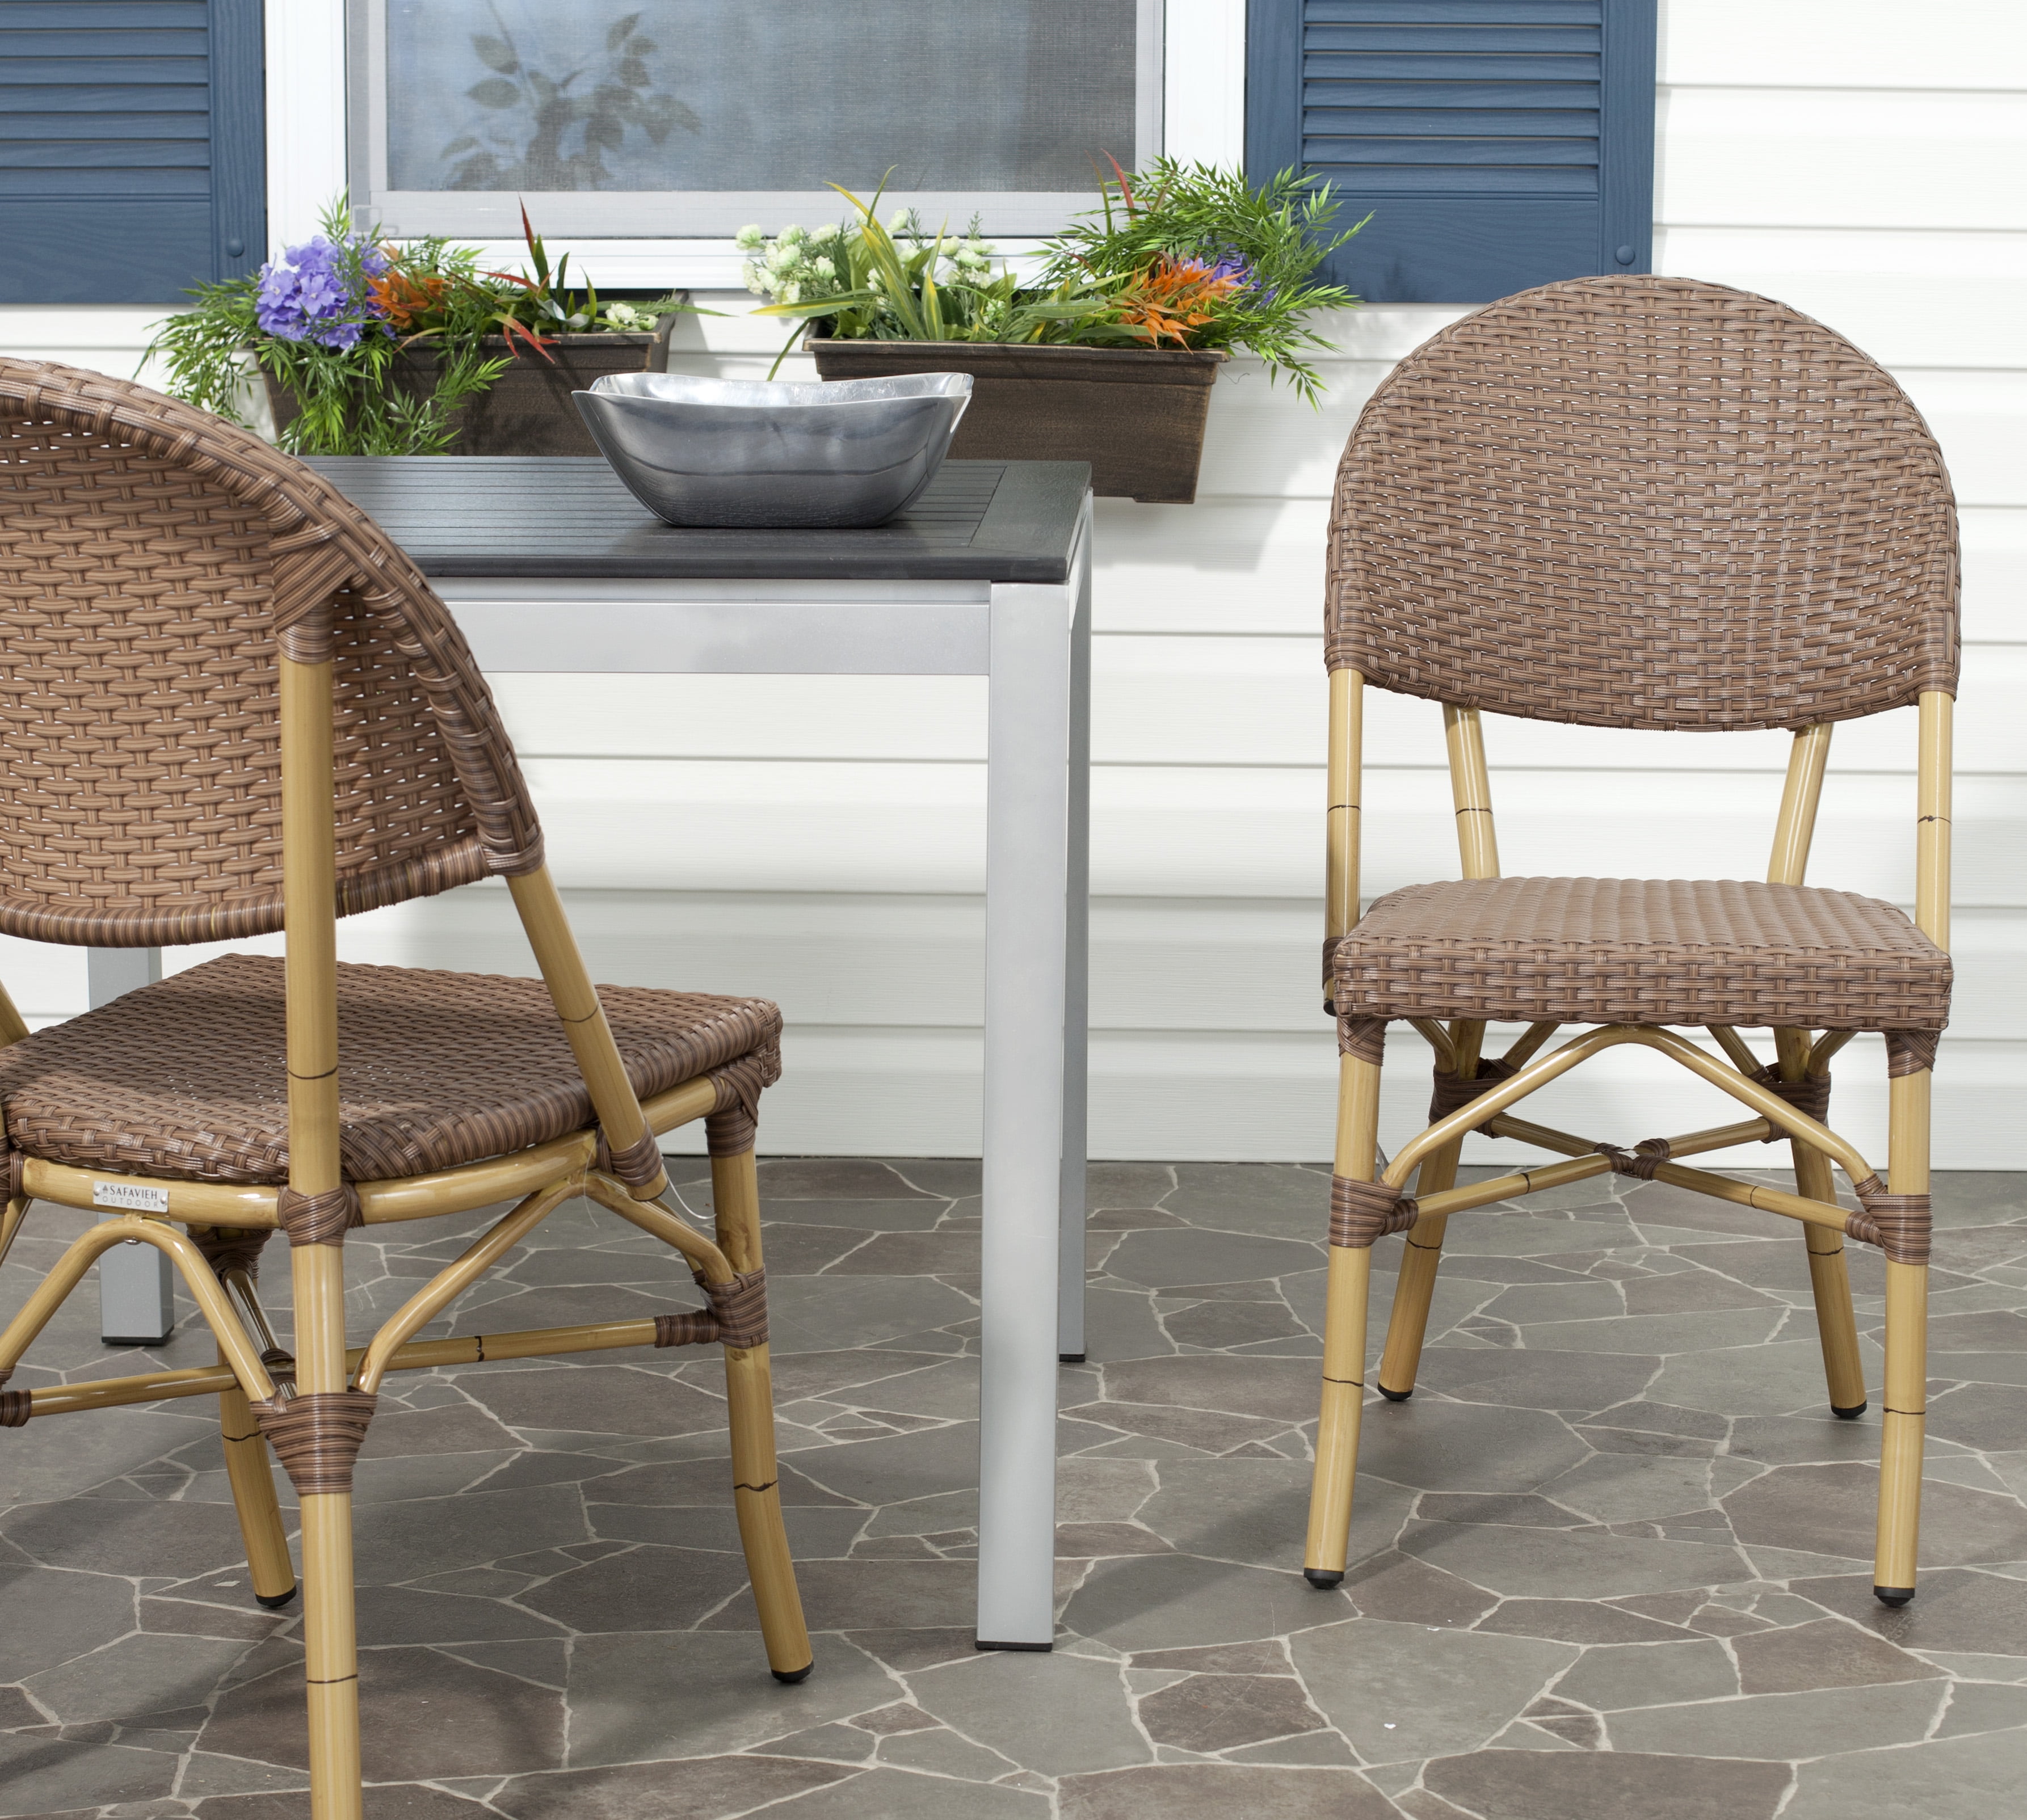 Safavieh Barrow Outdoor Patio Stacking Chair, Set of 2 - Brown ...